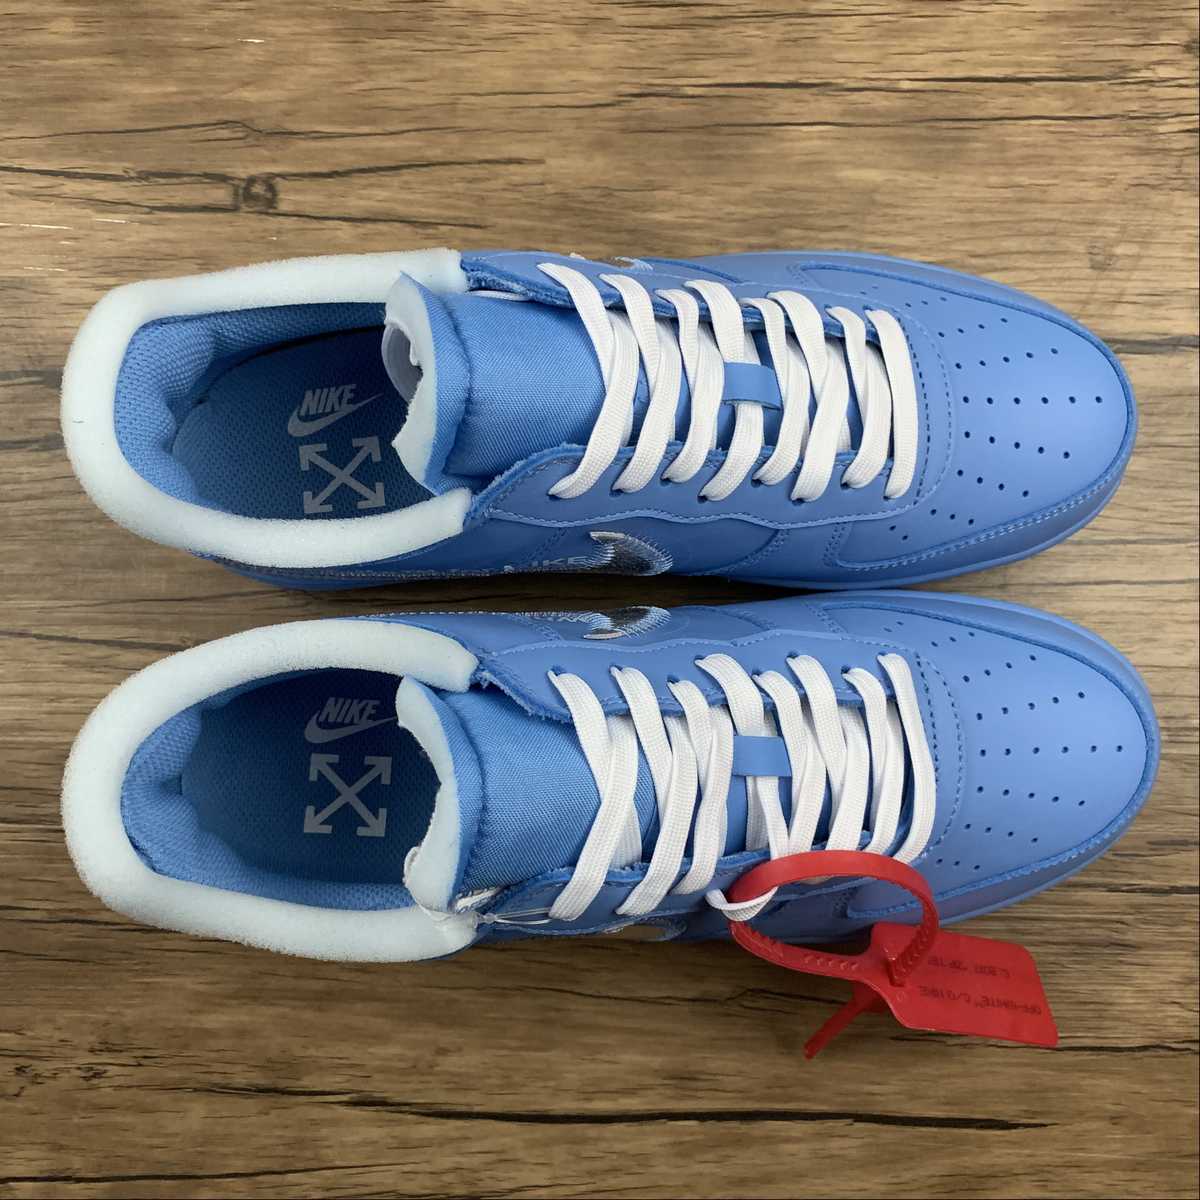 Air Force 1 low X off-white MCA ‘University Blue